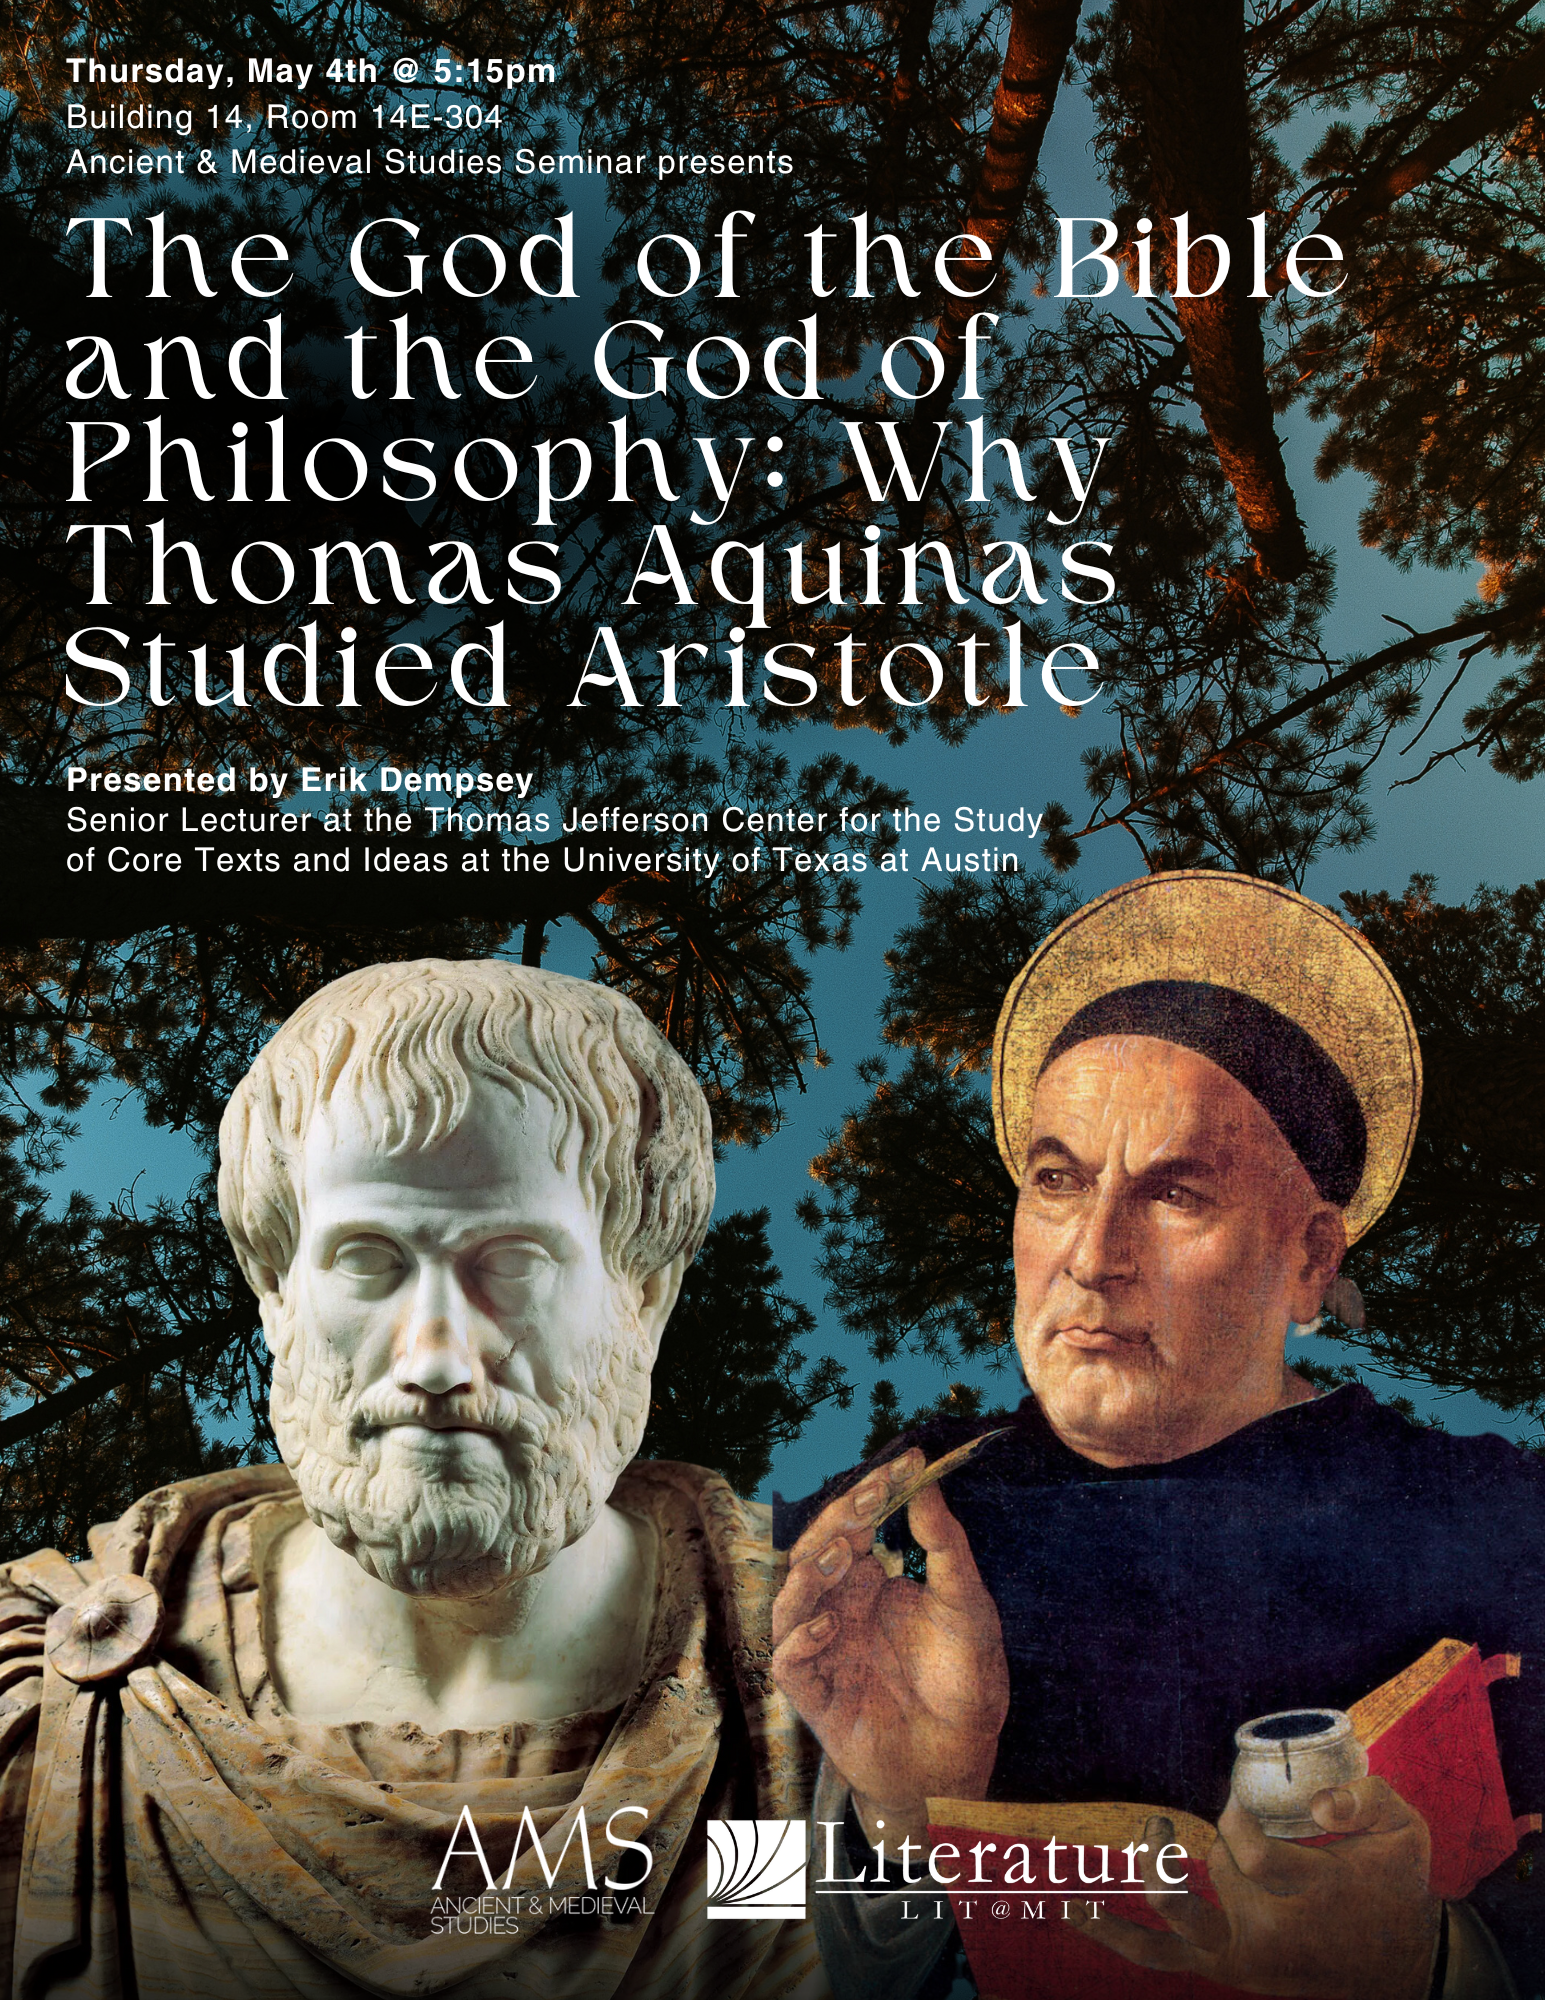 AMS presents, Erik Dempsey “The God of the Bible and the God of Philosophy: Why Thomas Aquinas Studied Aristotle”